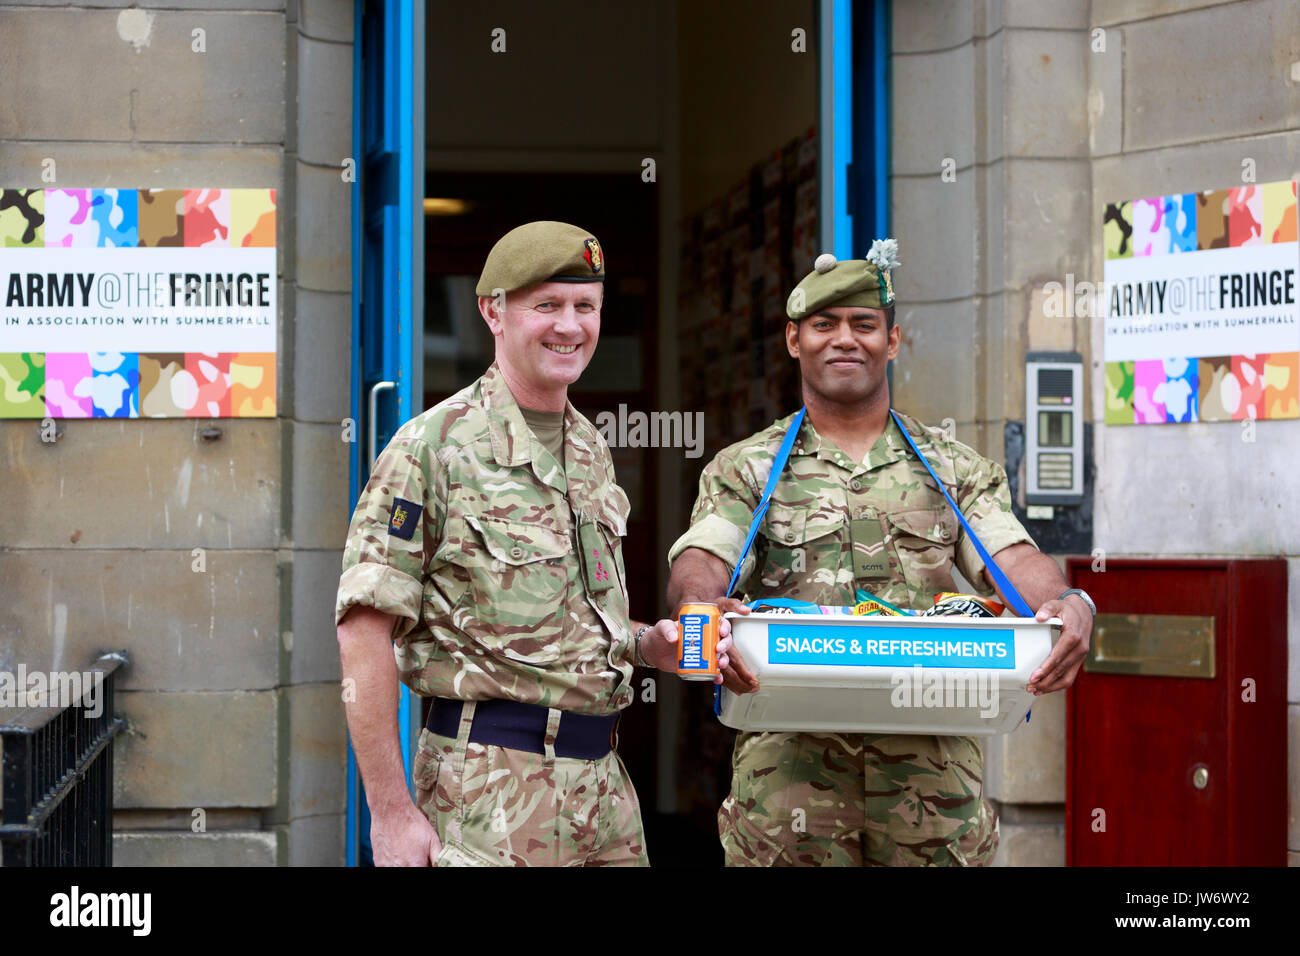 Edinburgh, Scotland 11th August. Head of the Army in Scotland Welcomes Performances for New Fringe Venue. (Venue 210) Brigadier Gary Deakin Welcomed performers to the history Hepburn House for the opening of the Army's first ever Edinburgh Festival Fringe Venue. Edinburgh. Pictured Brigadier Gary Deakin. Pako Mera/Alamy Live News Stock Photo